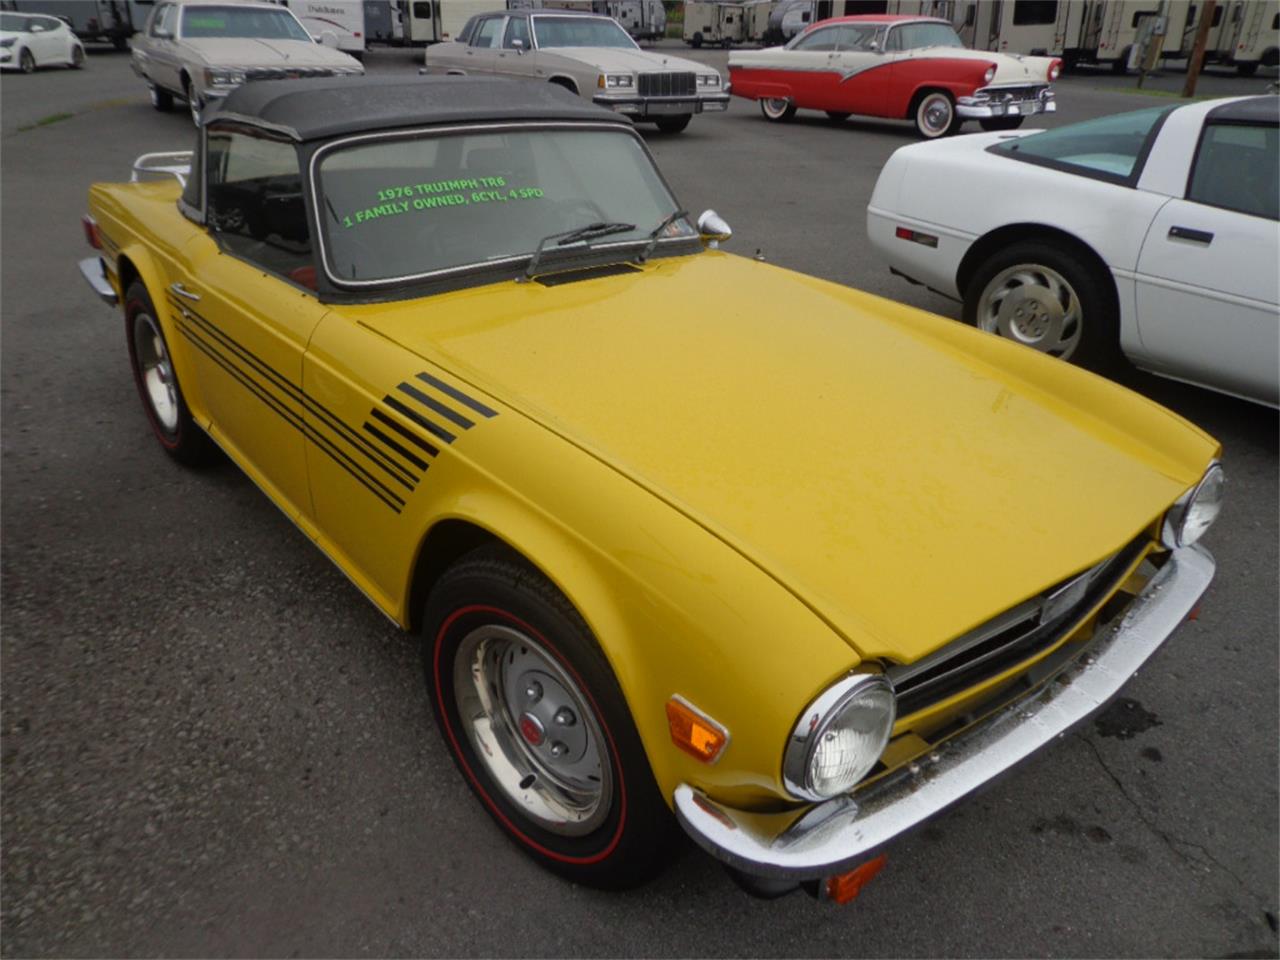 1976 Triumph TR6 for sale in Mill Hall, PA – photo 3